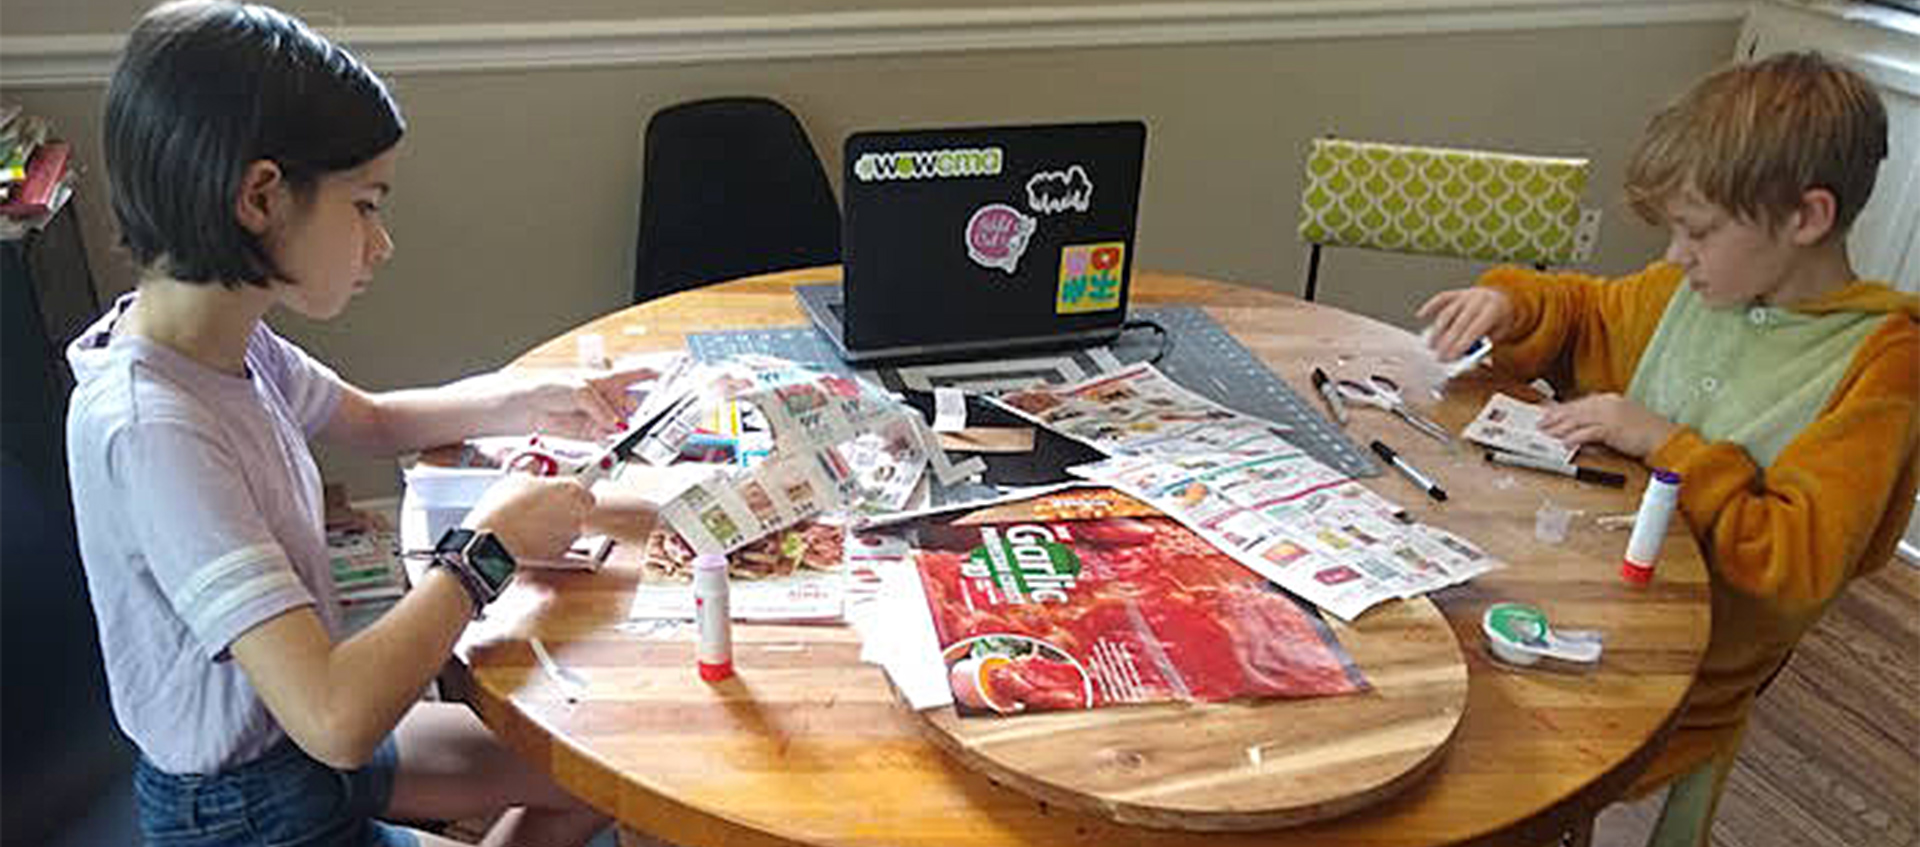 A young girl and boy sit and work at a table covered in printed circulars, flattened packaging, and art supplies